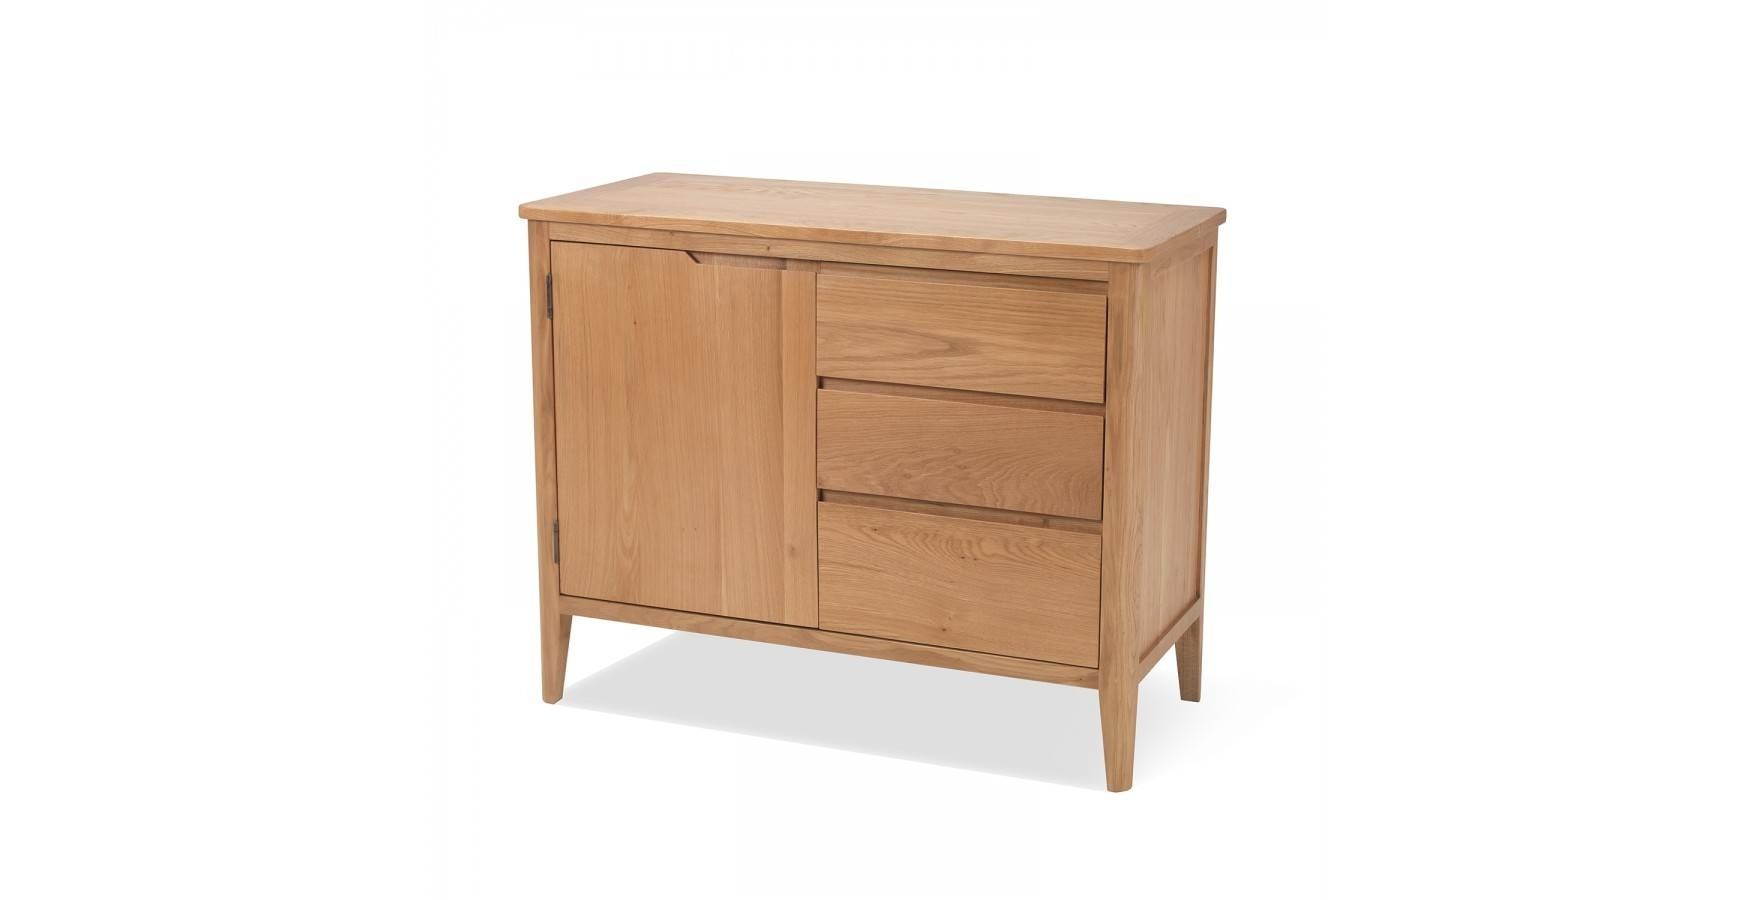 Cadley Oak Small Sideboard With Drawers – Lifestyle Furniture Uk Throughout Best And Newest Sideboards With Drawers (View 4 of 15)